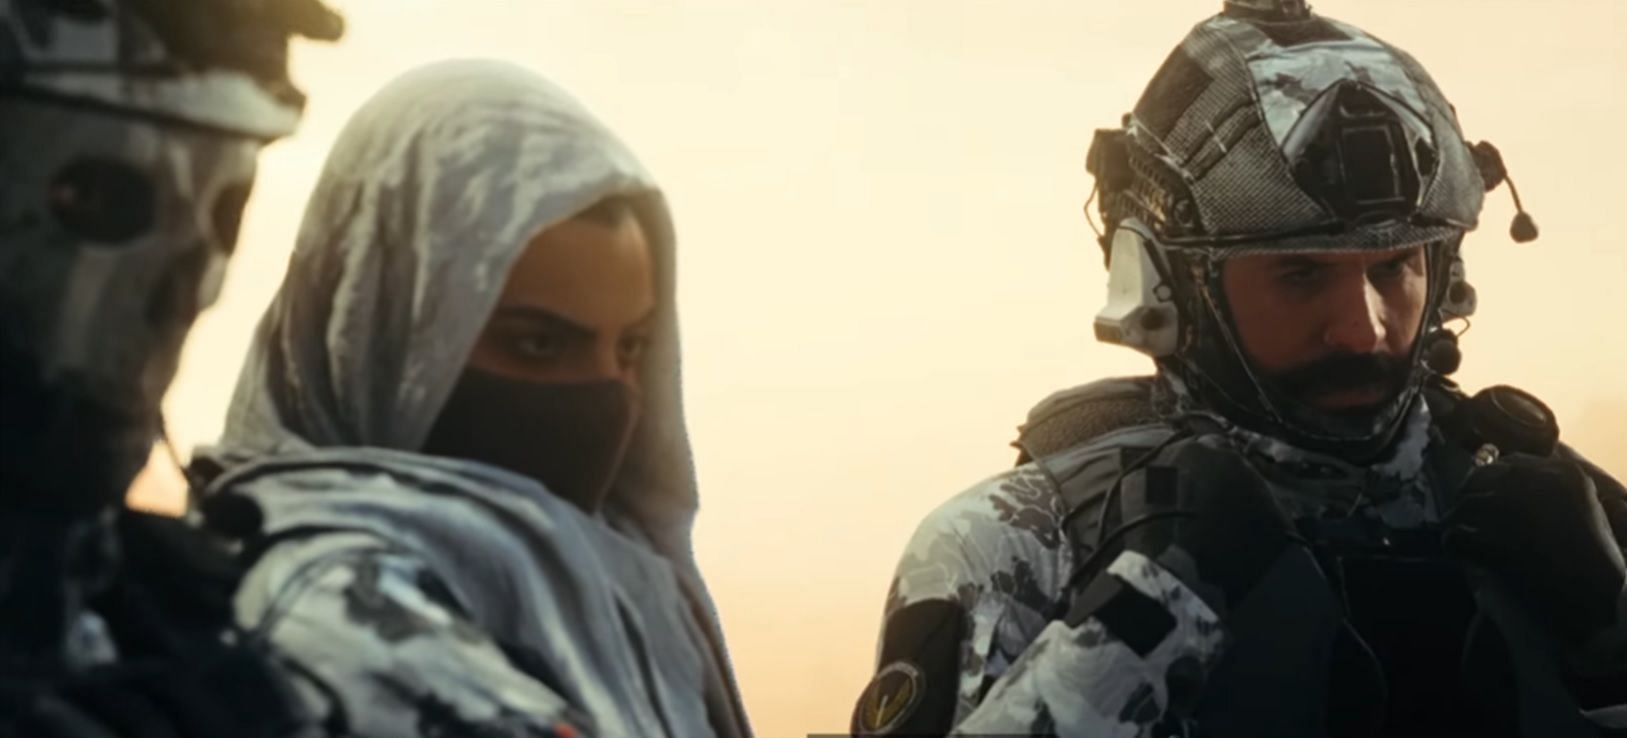 Ghost, Farah, and Price in Winter 141 operator skins (Image via Activision)